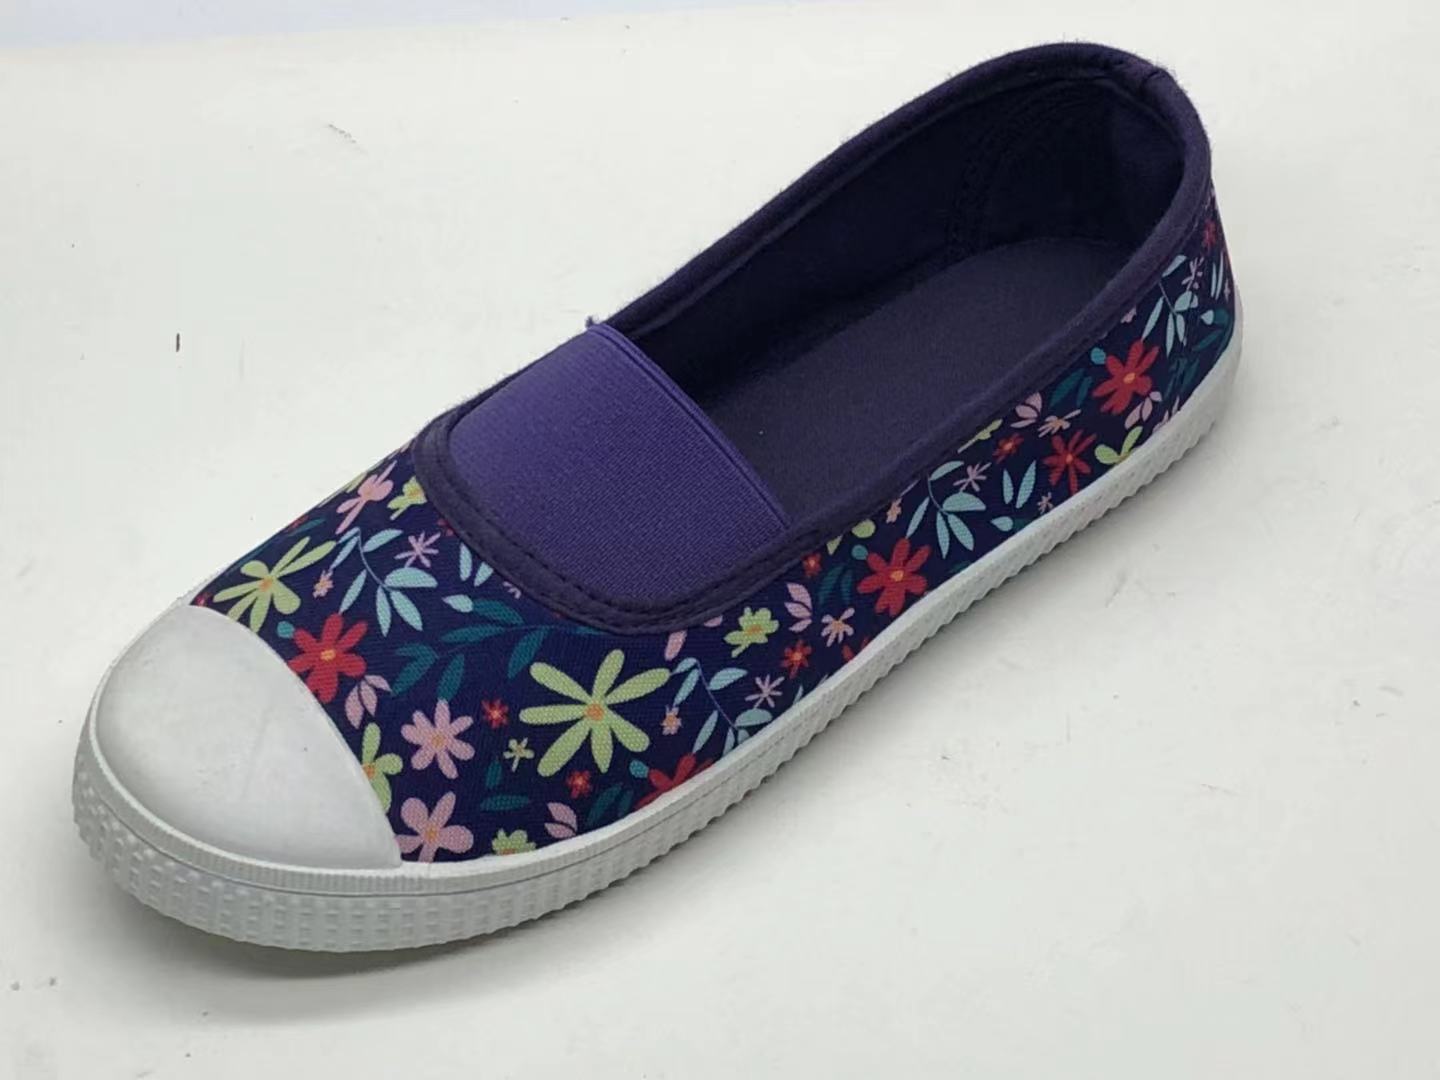 Women's Casual Slip-On Loafers Sneakers Shoes 